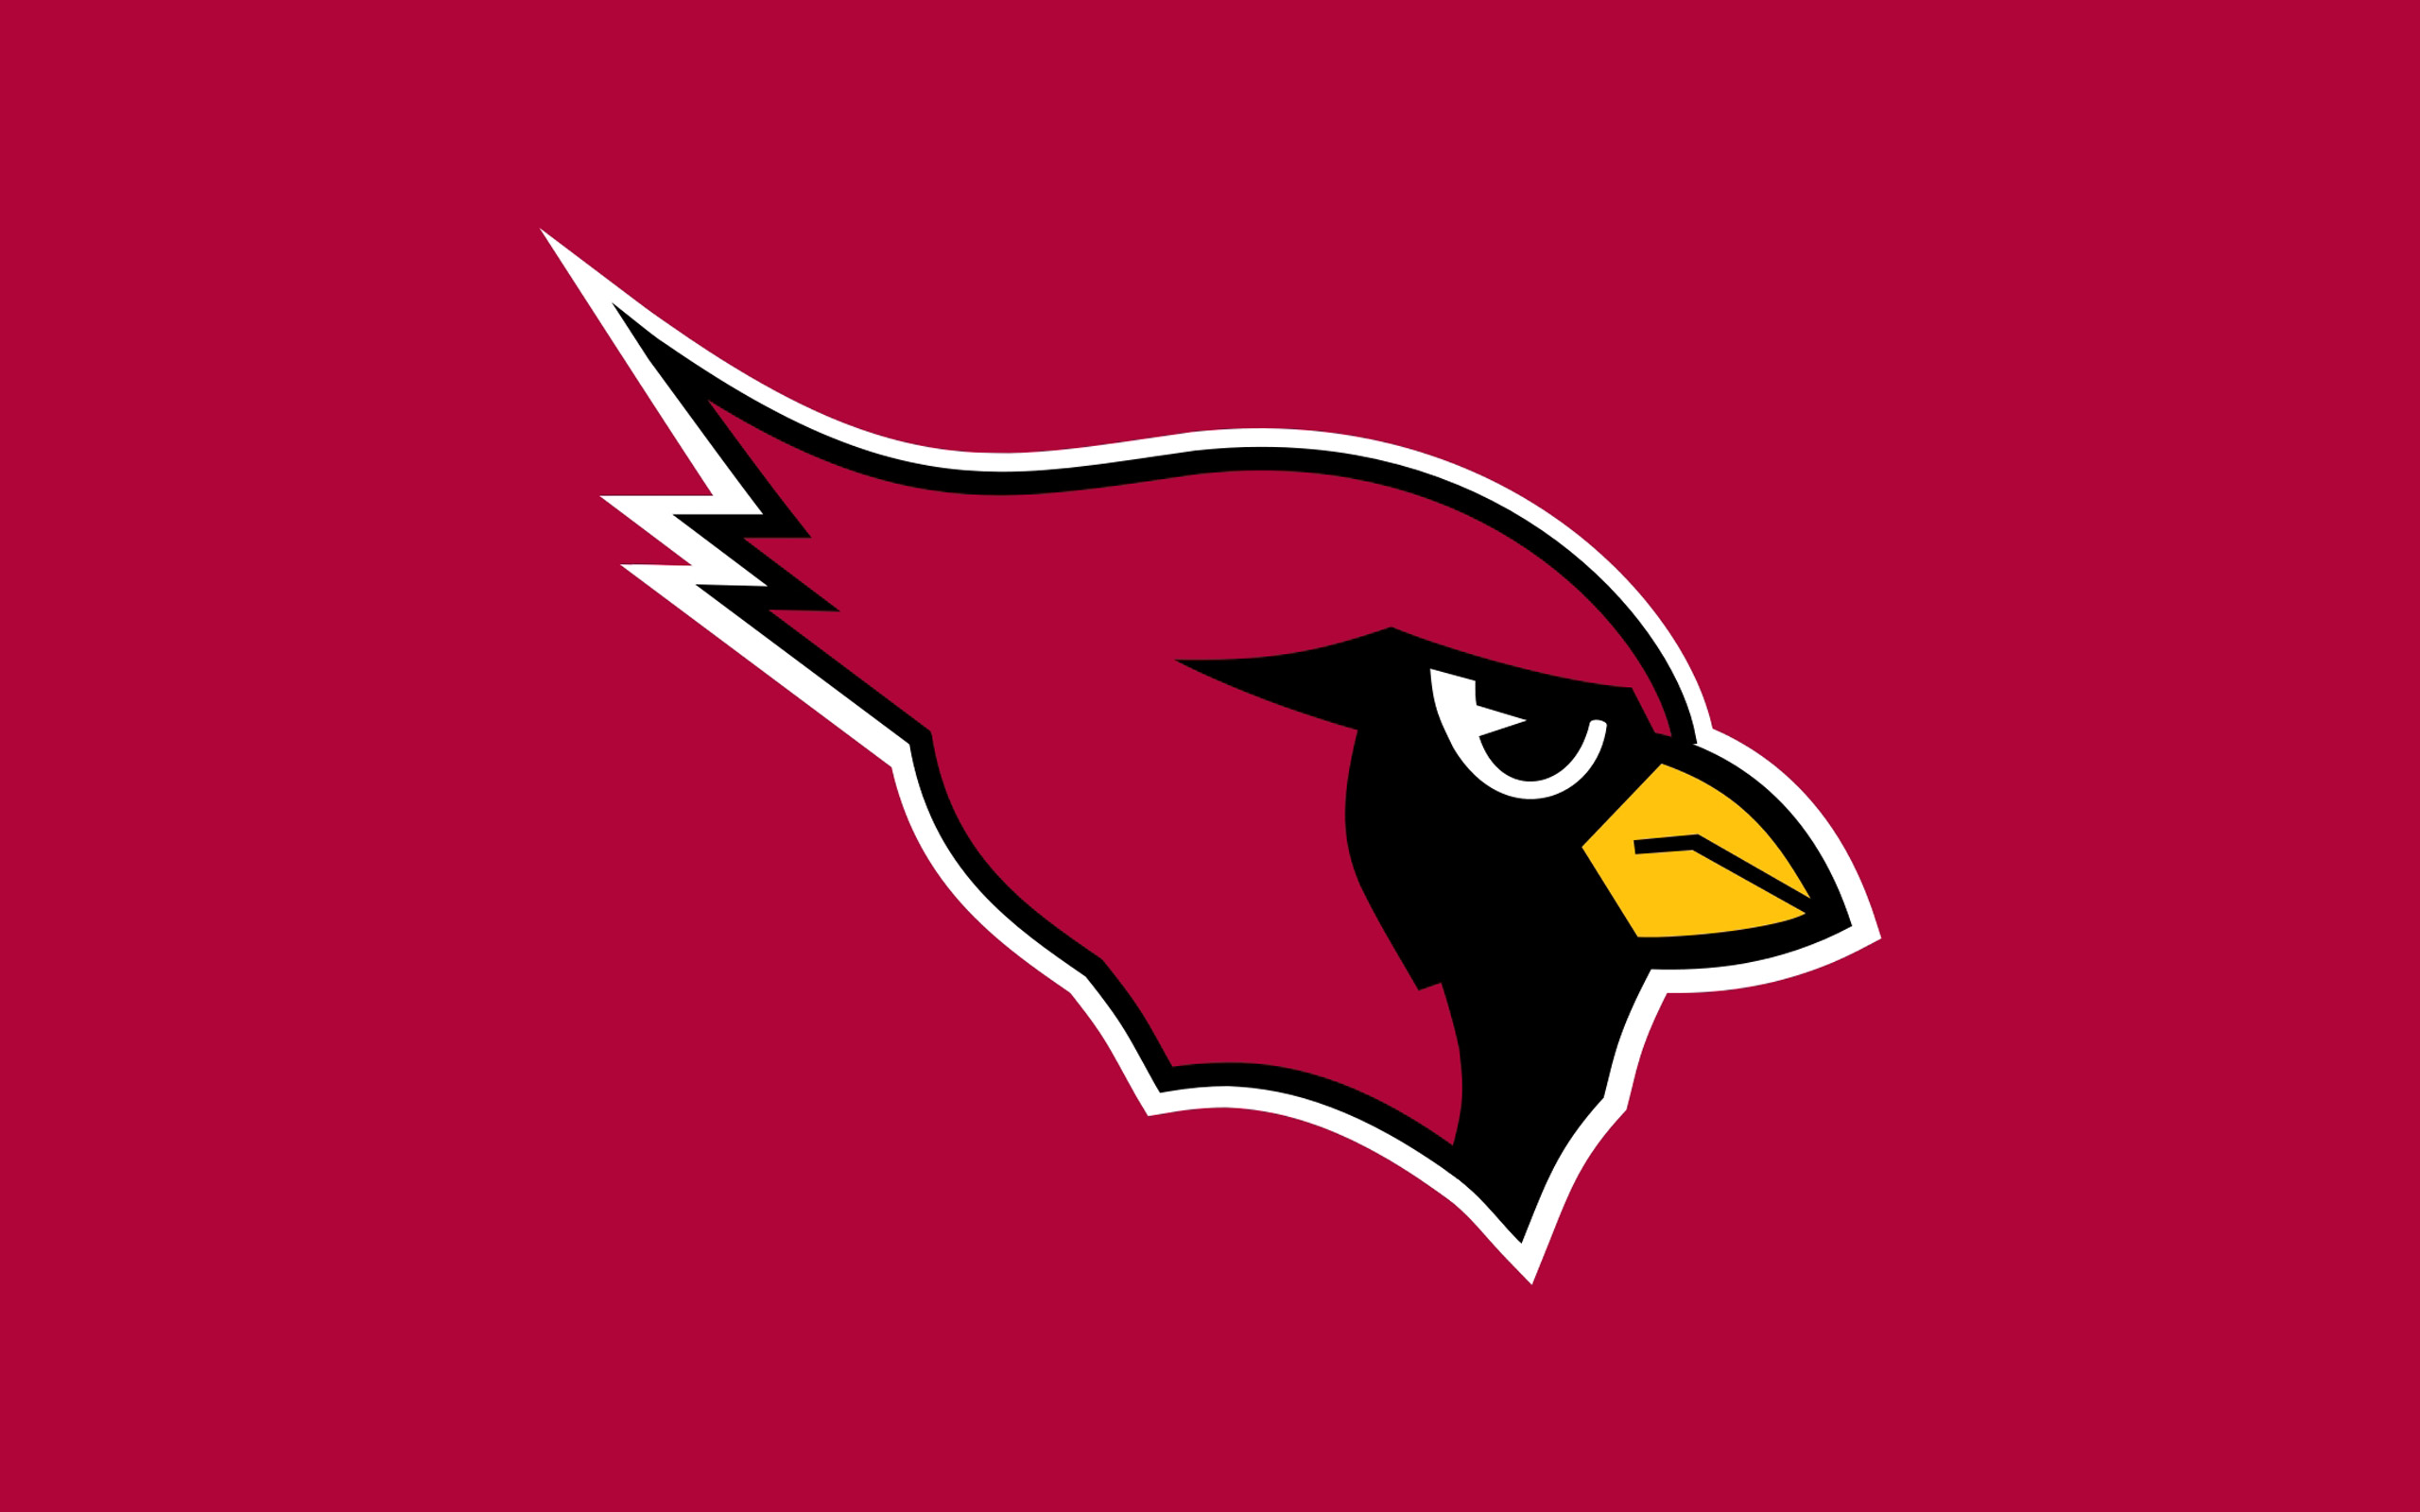  below to delete this arizona cardinals2 2560x1600 photo image from